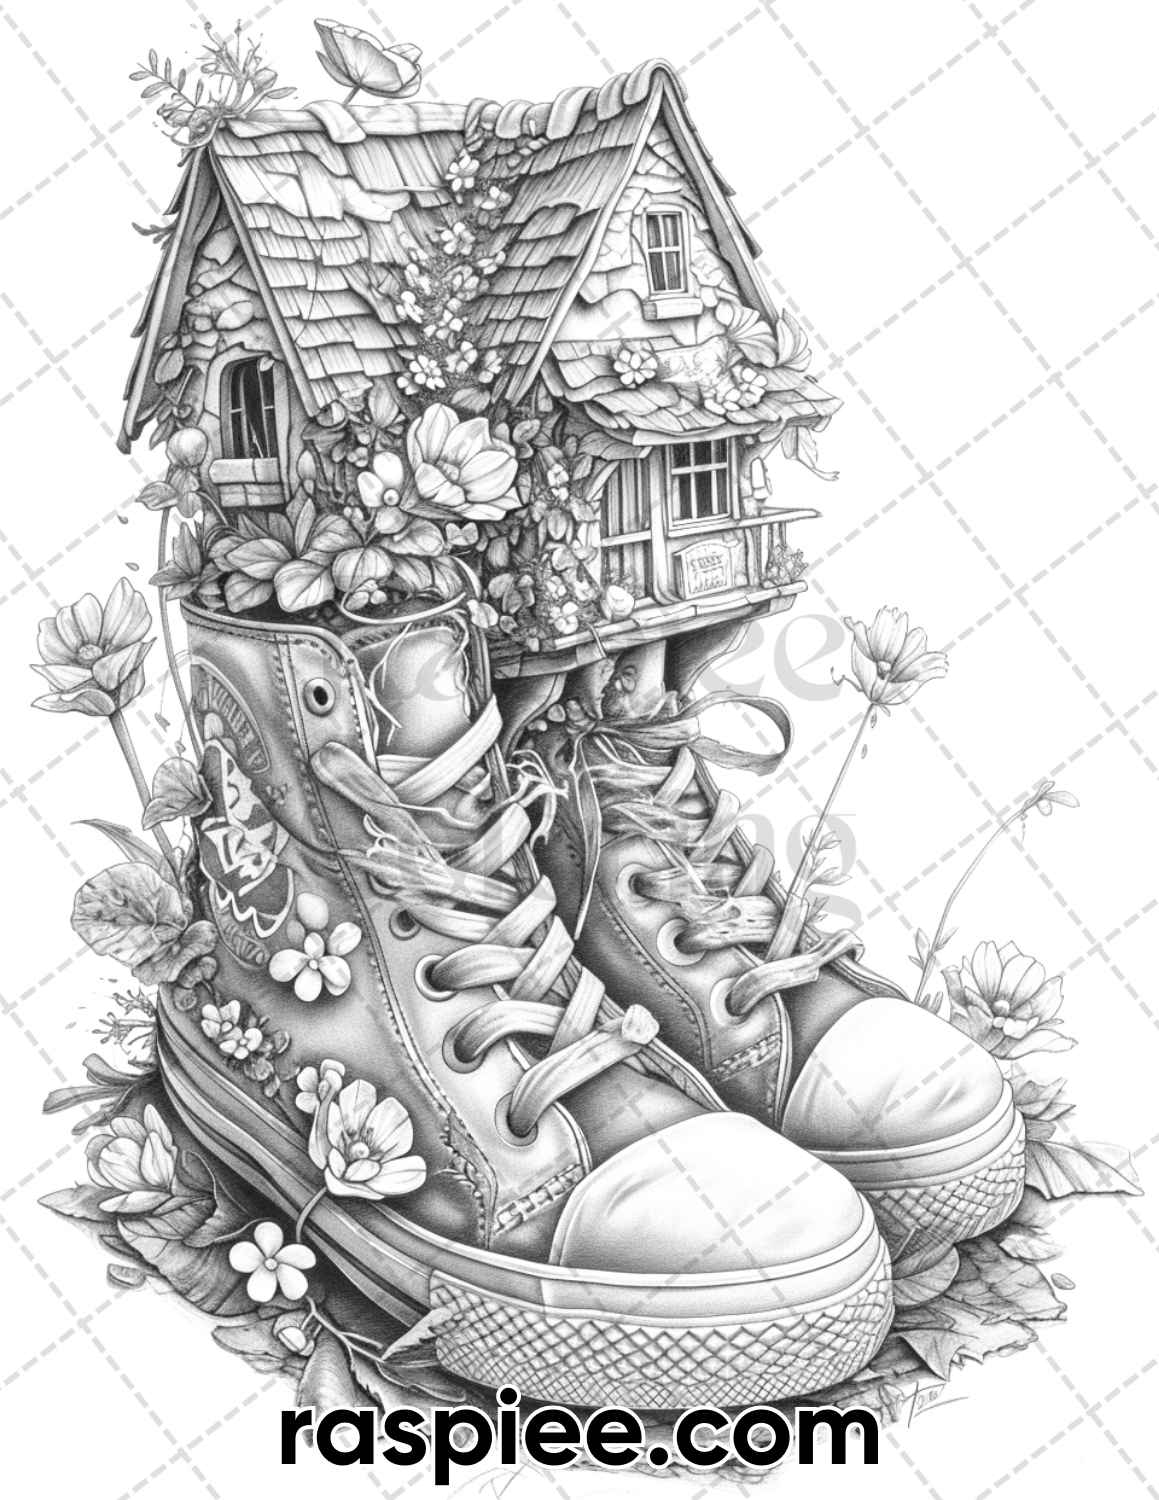 adult coloring pages, adult coloring sheets, adult coloring book pdf, adult coloring book printable, grayscale coloring pages, grayscale coloring books, fantasy coloring pages for adults, fantasy coloring book, grayscale illustration, fantasy shoe house coloring pages